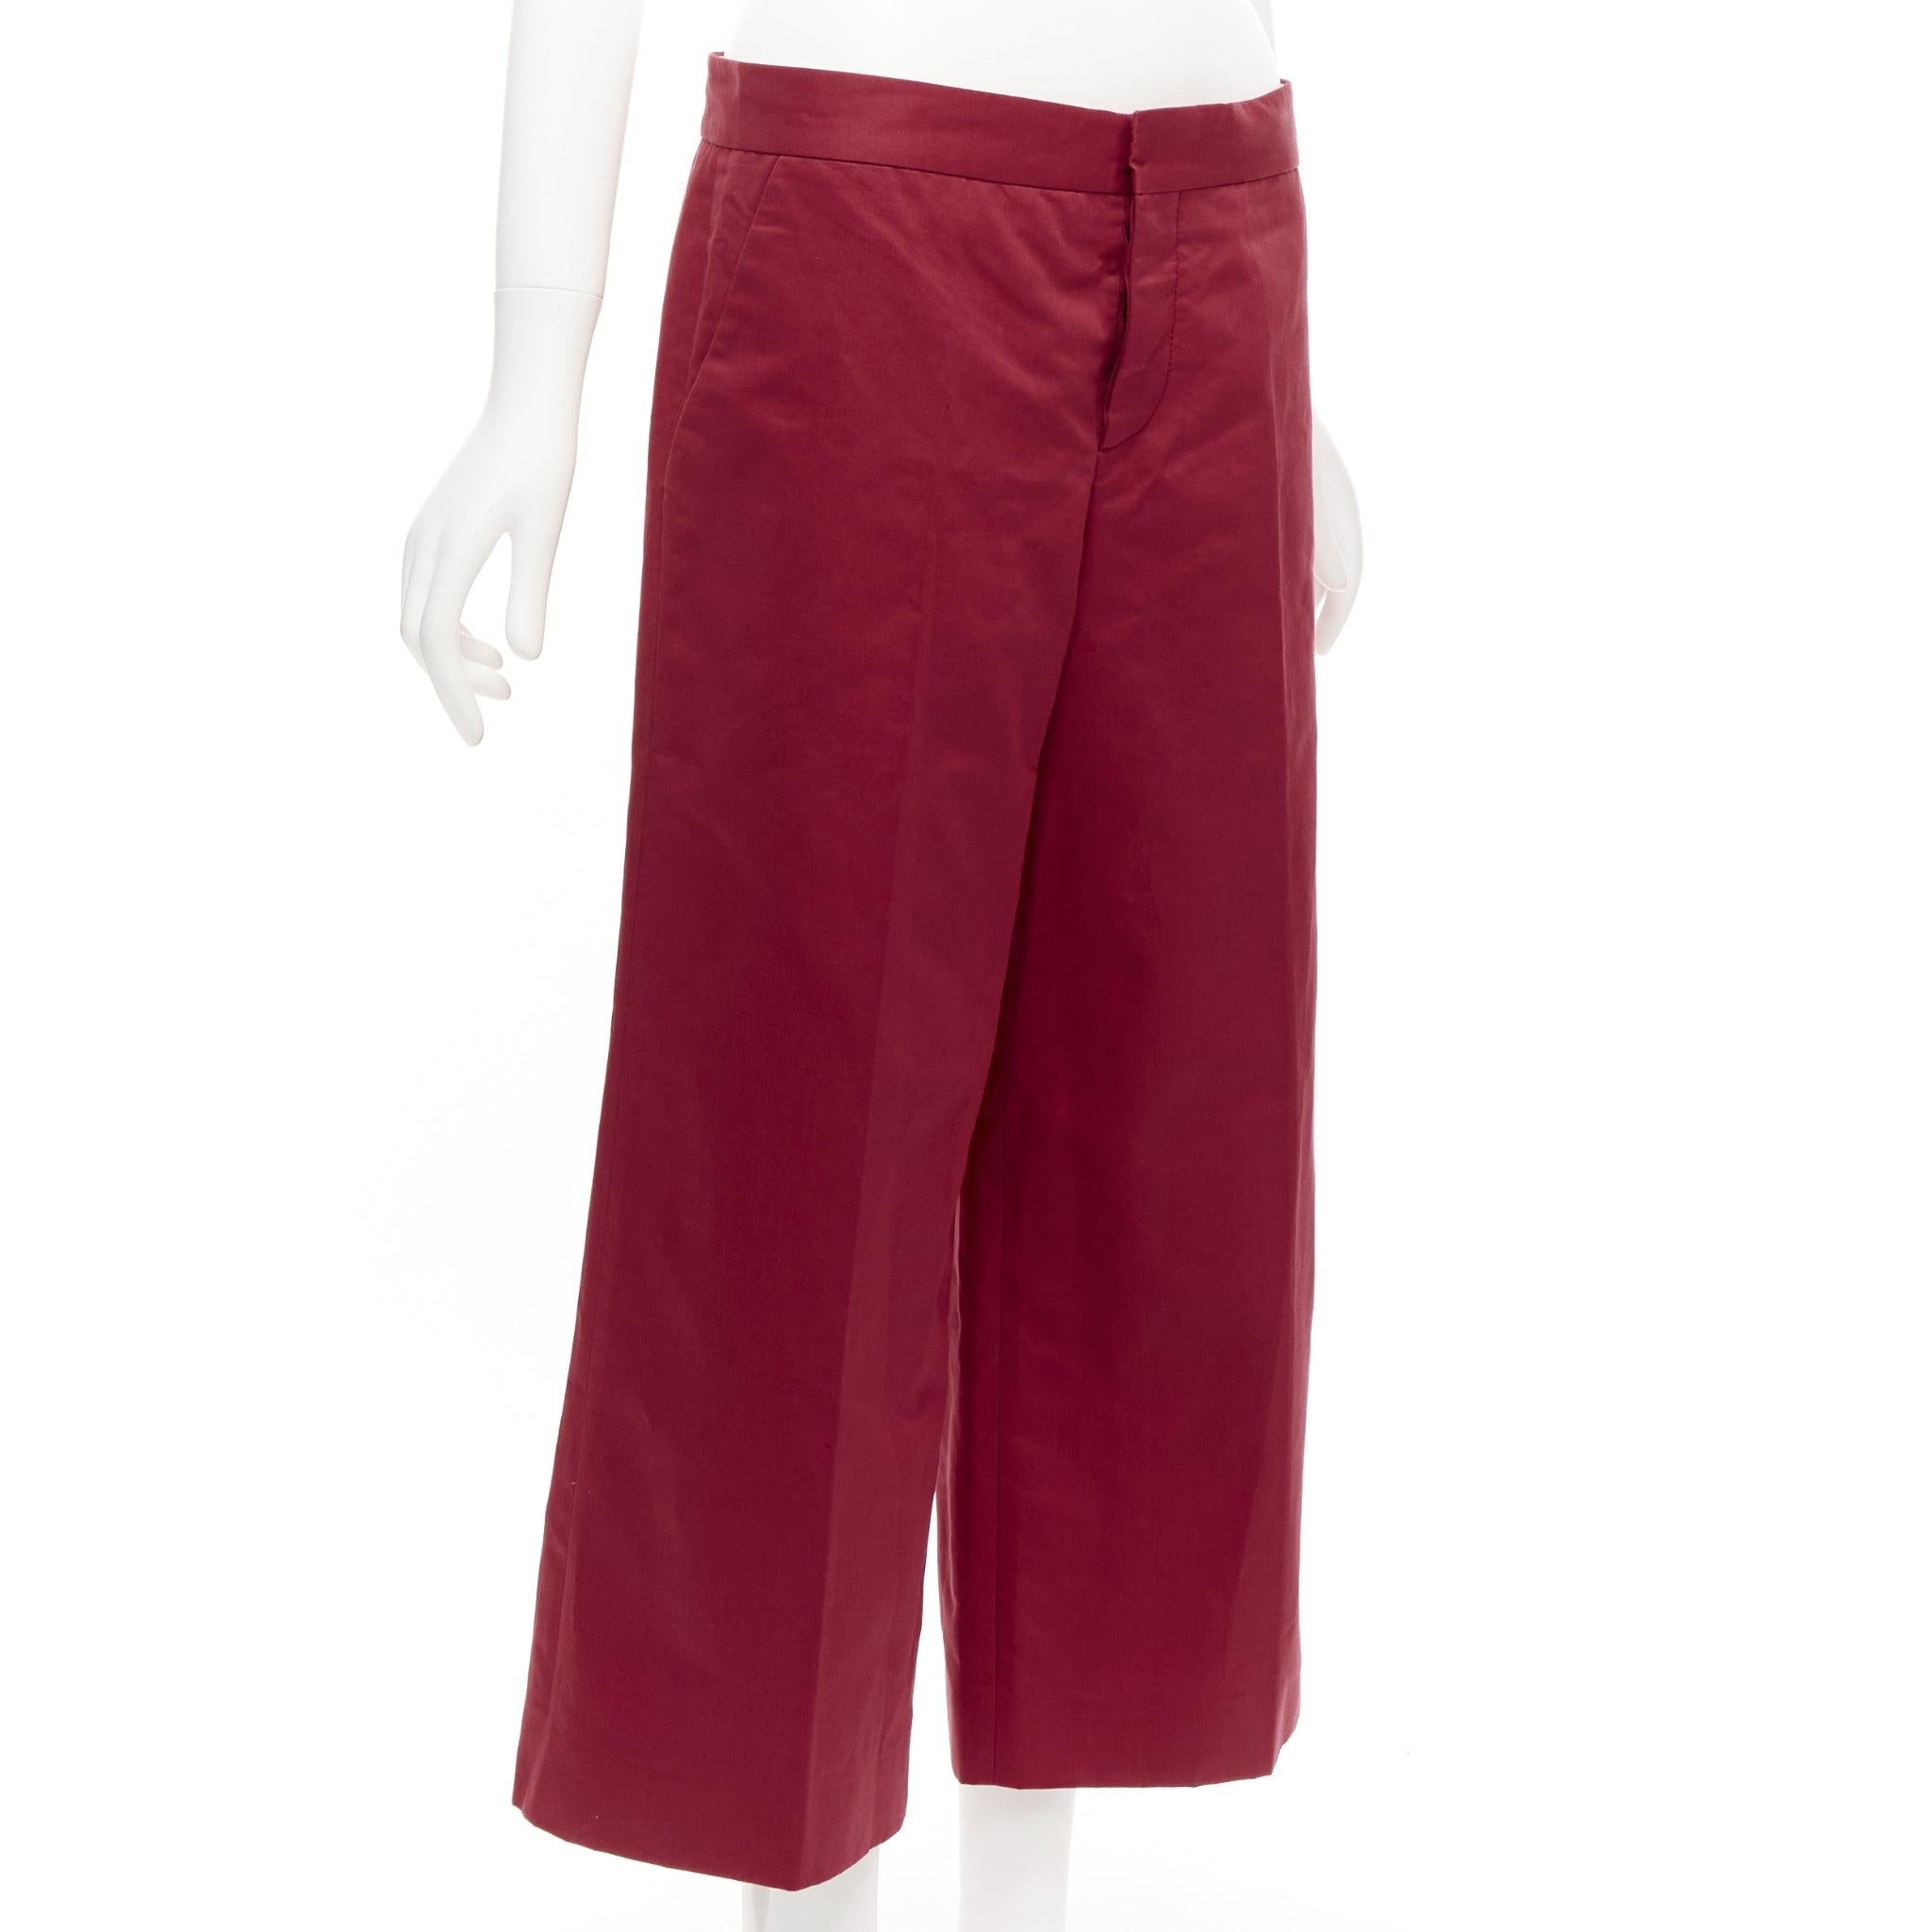 MARNI red cotton linen minimal classic wide cropped pants IT40 S
Reference: CELG/A00254
Brand: Marni
Material: Cotton, Linen
Color: Red
Pattern: Solid
Closure: Button Fly
Extra Details: Darted back.
Made in: Italy

CONDITION:
Condition: Excellent,